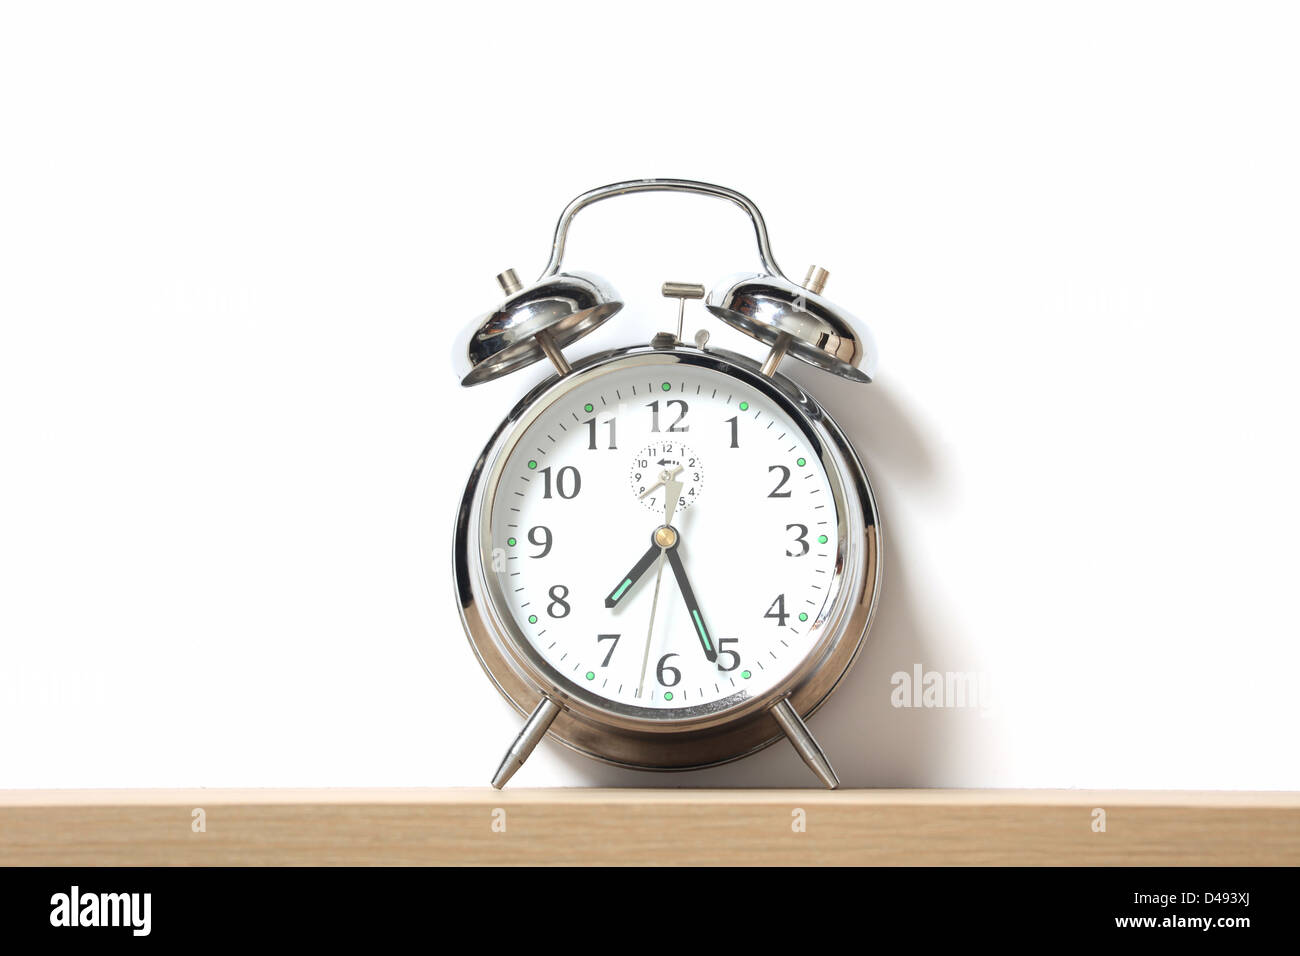 Chrome alarm clock with bells on, set just after 7-25. Stock Photo